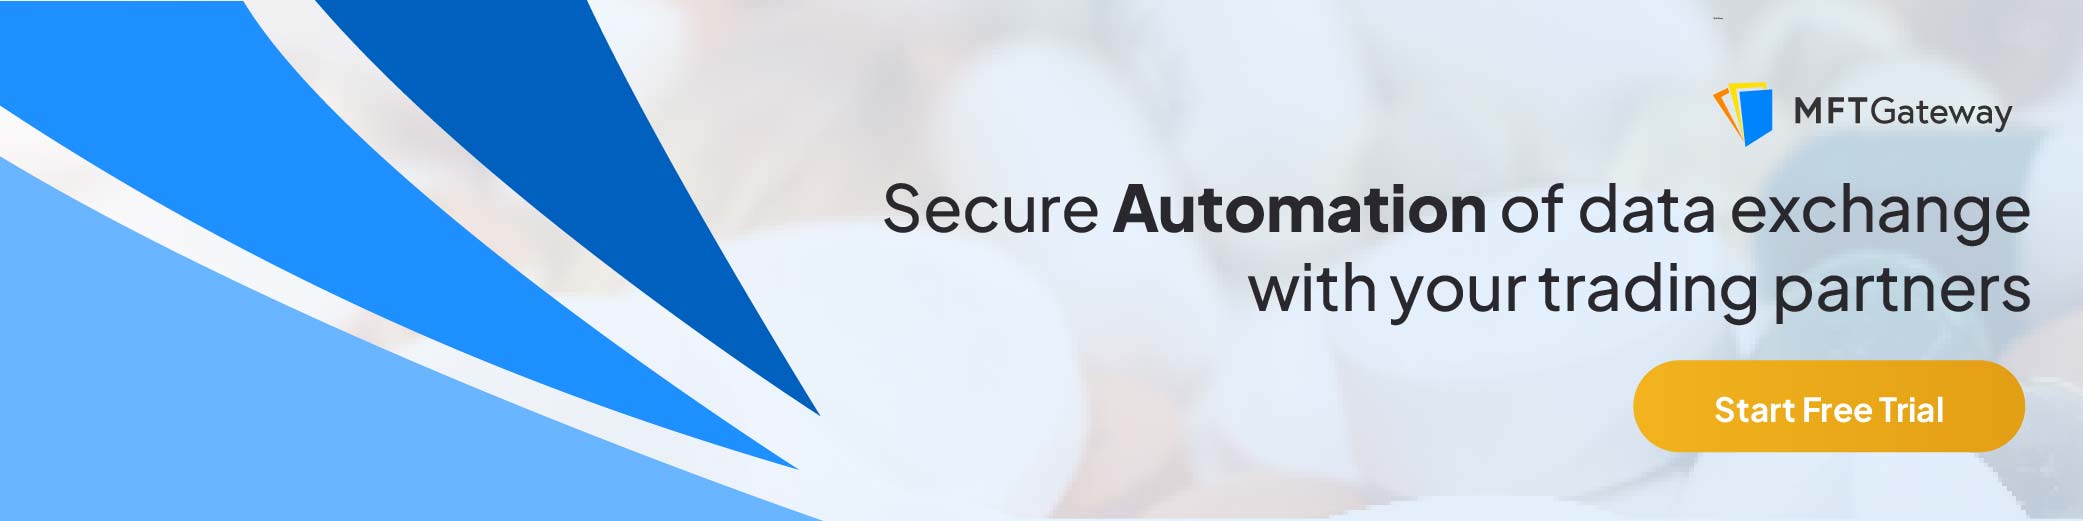 Secure Automation of data exchange